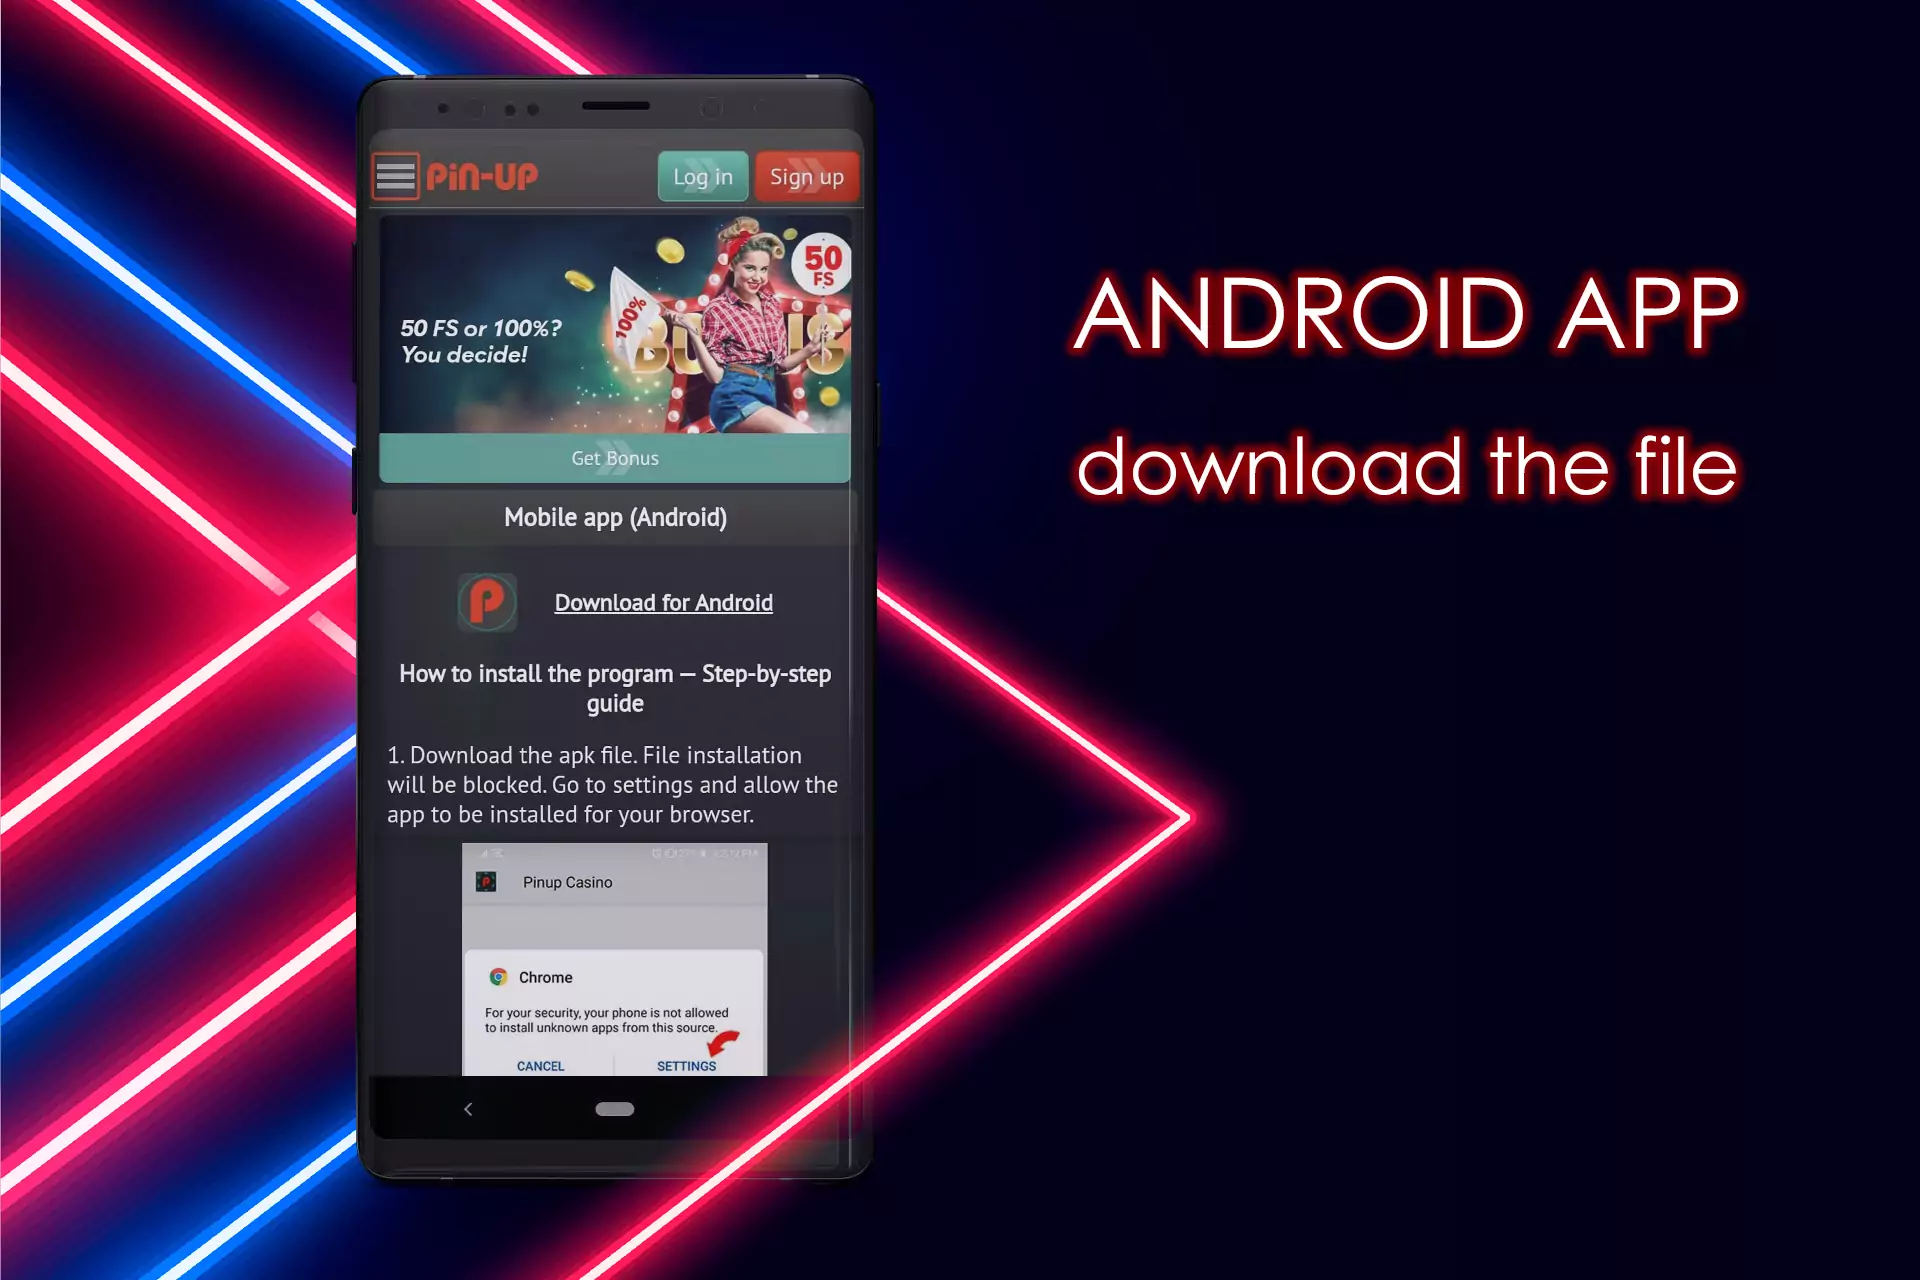 Click on the 'Download for Android' to get the app to your smartphone.